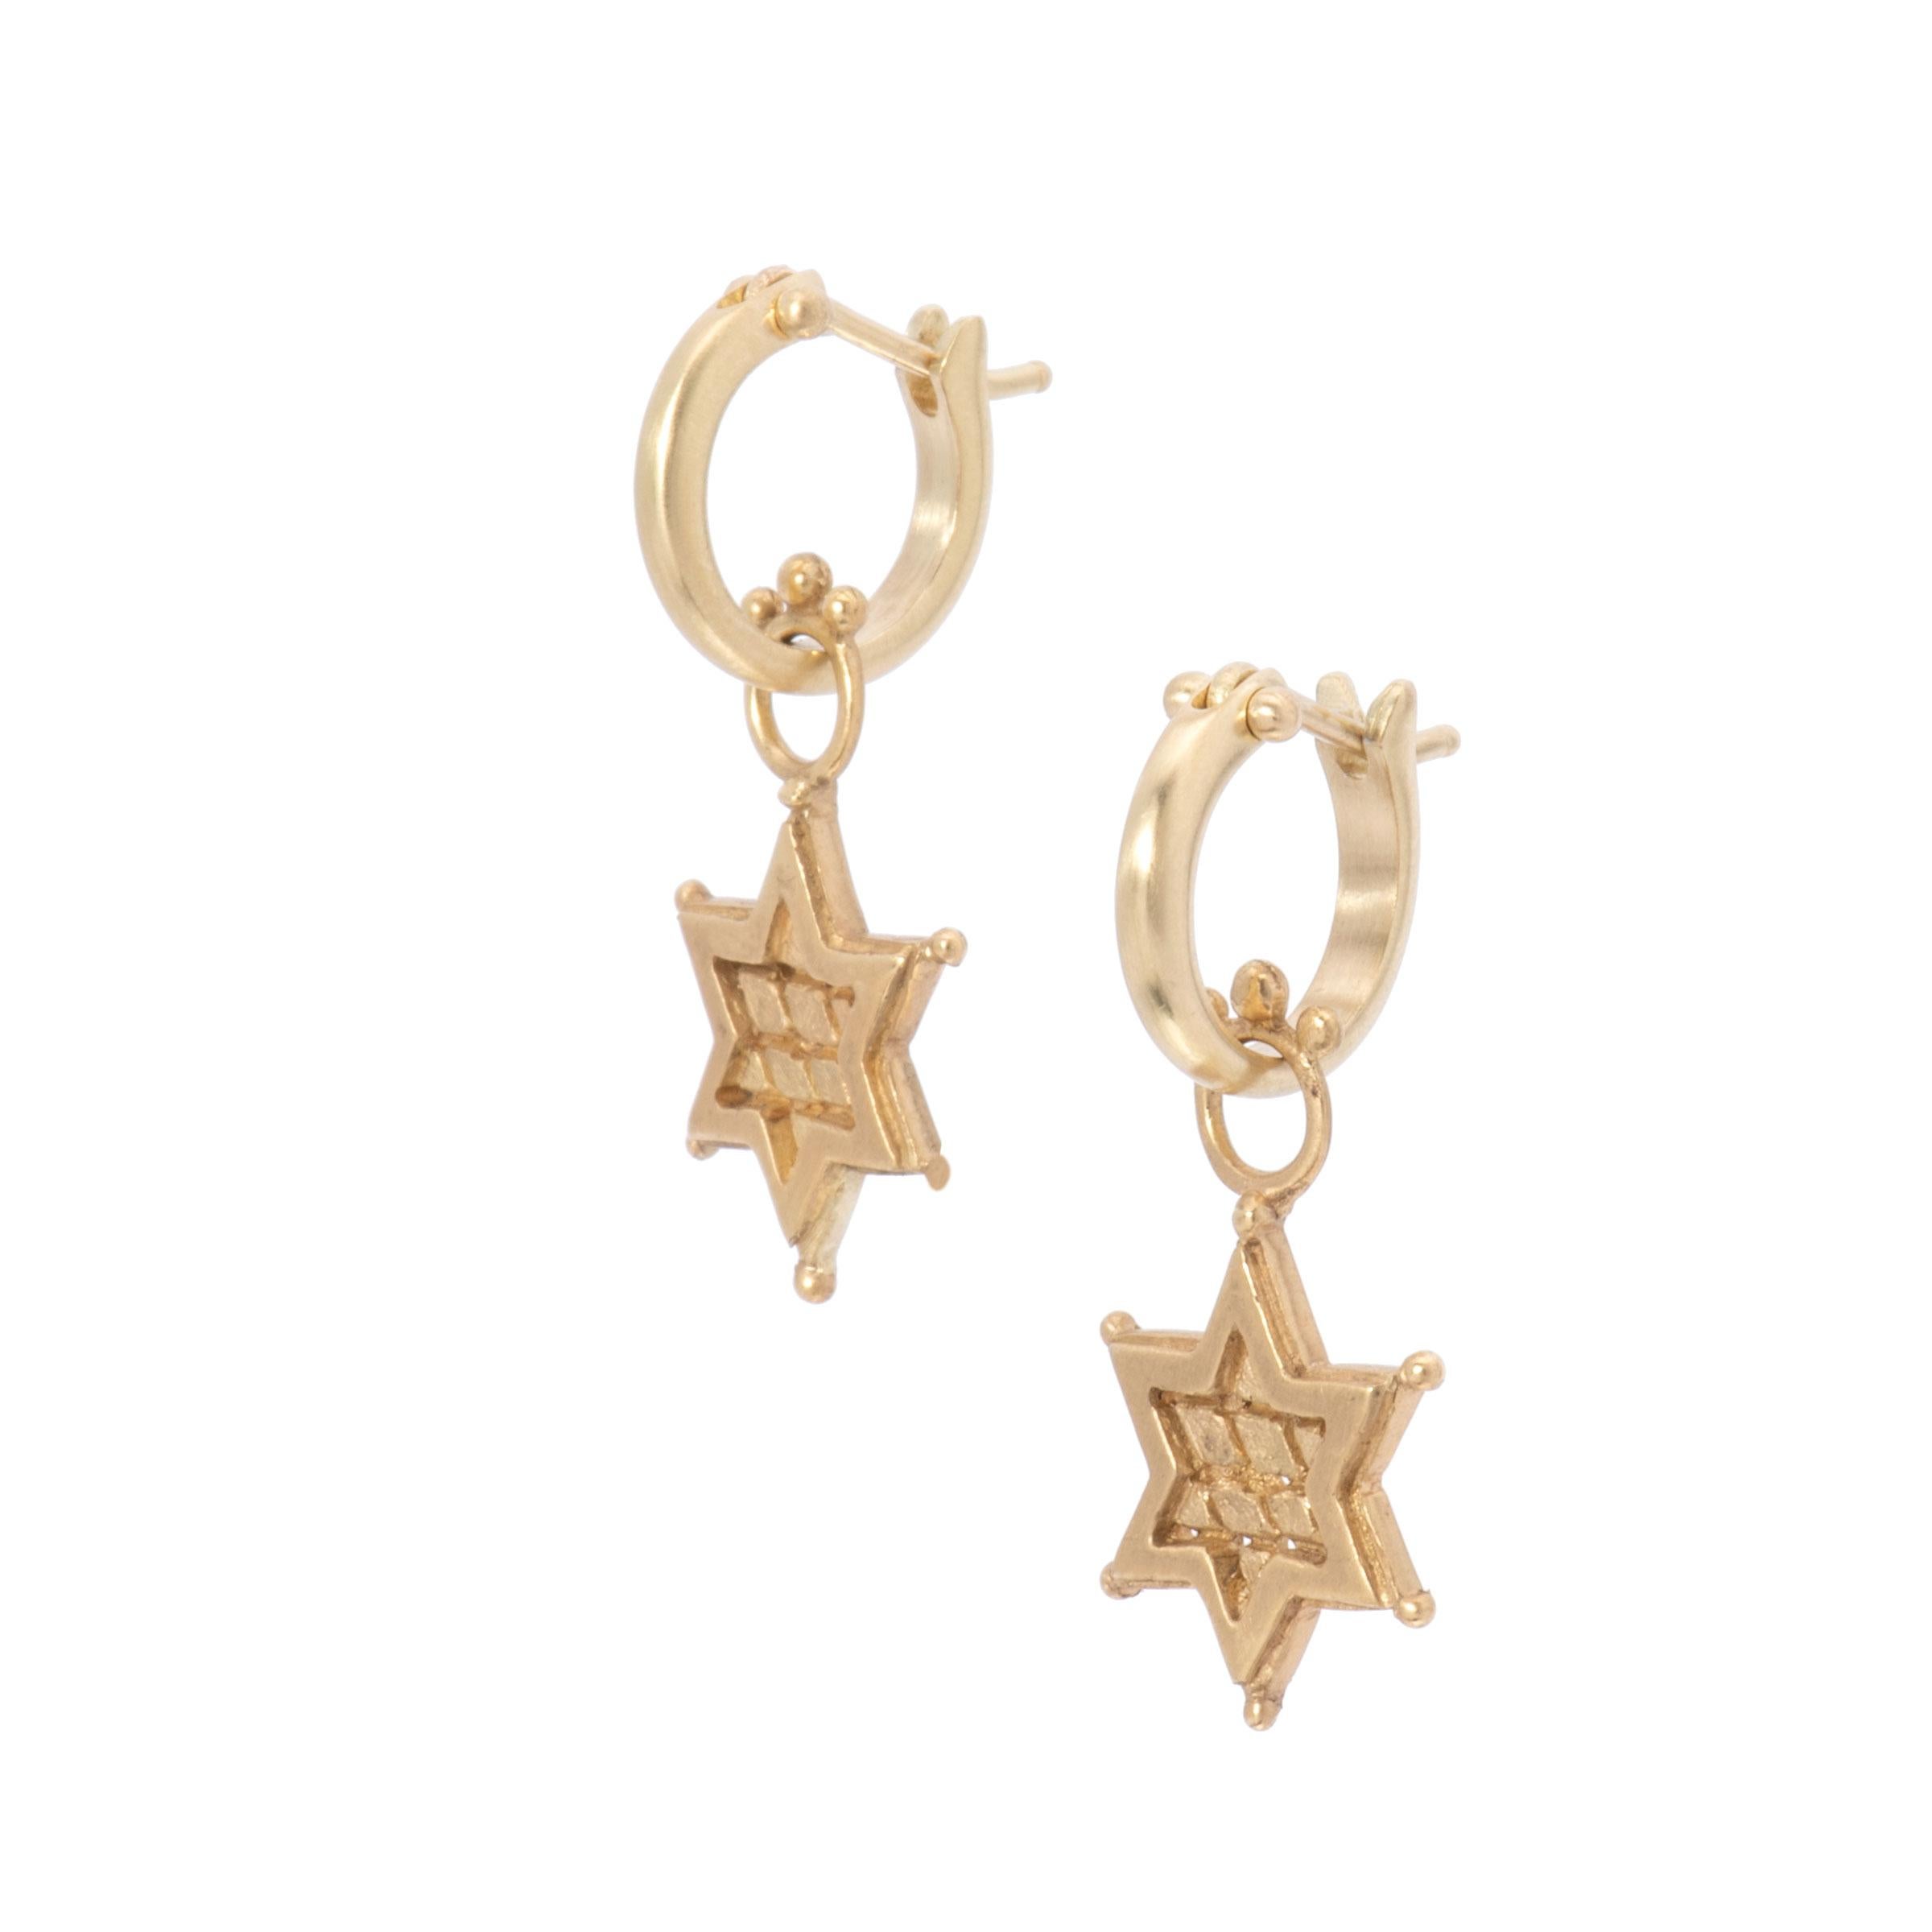 Hand crafted in our studio, the Star of David Drop Earrings in 18k Gold feature 6 beaded points and are crowned with a beaded bail. Hung from our small plain hoops which click shut for security, the gold glows with warmth in our signature satin